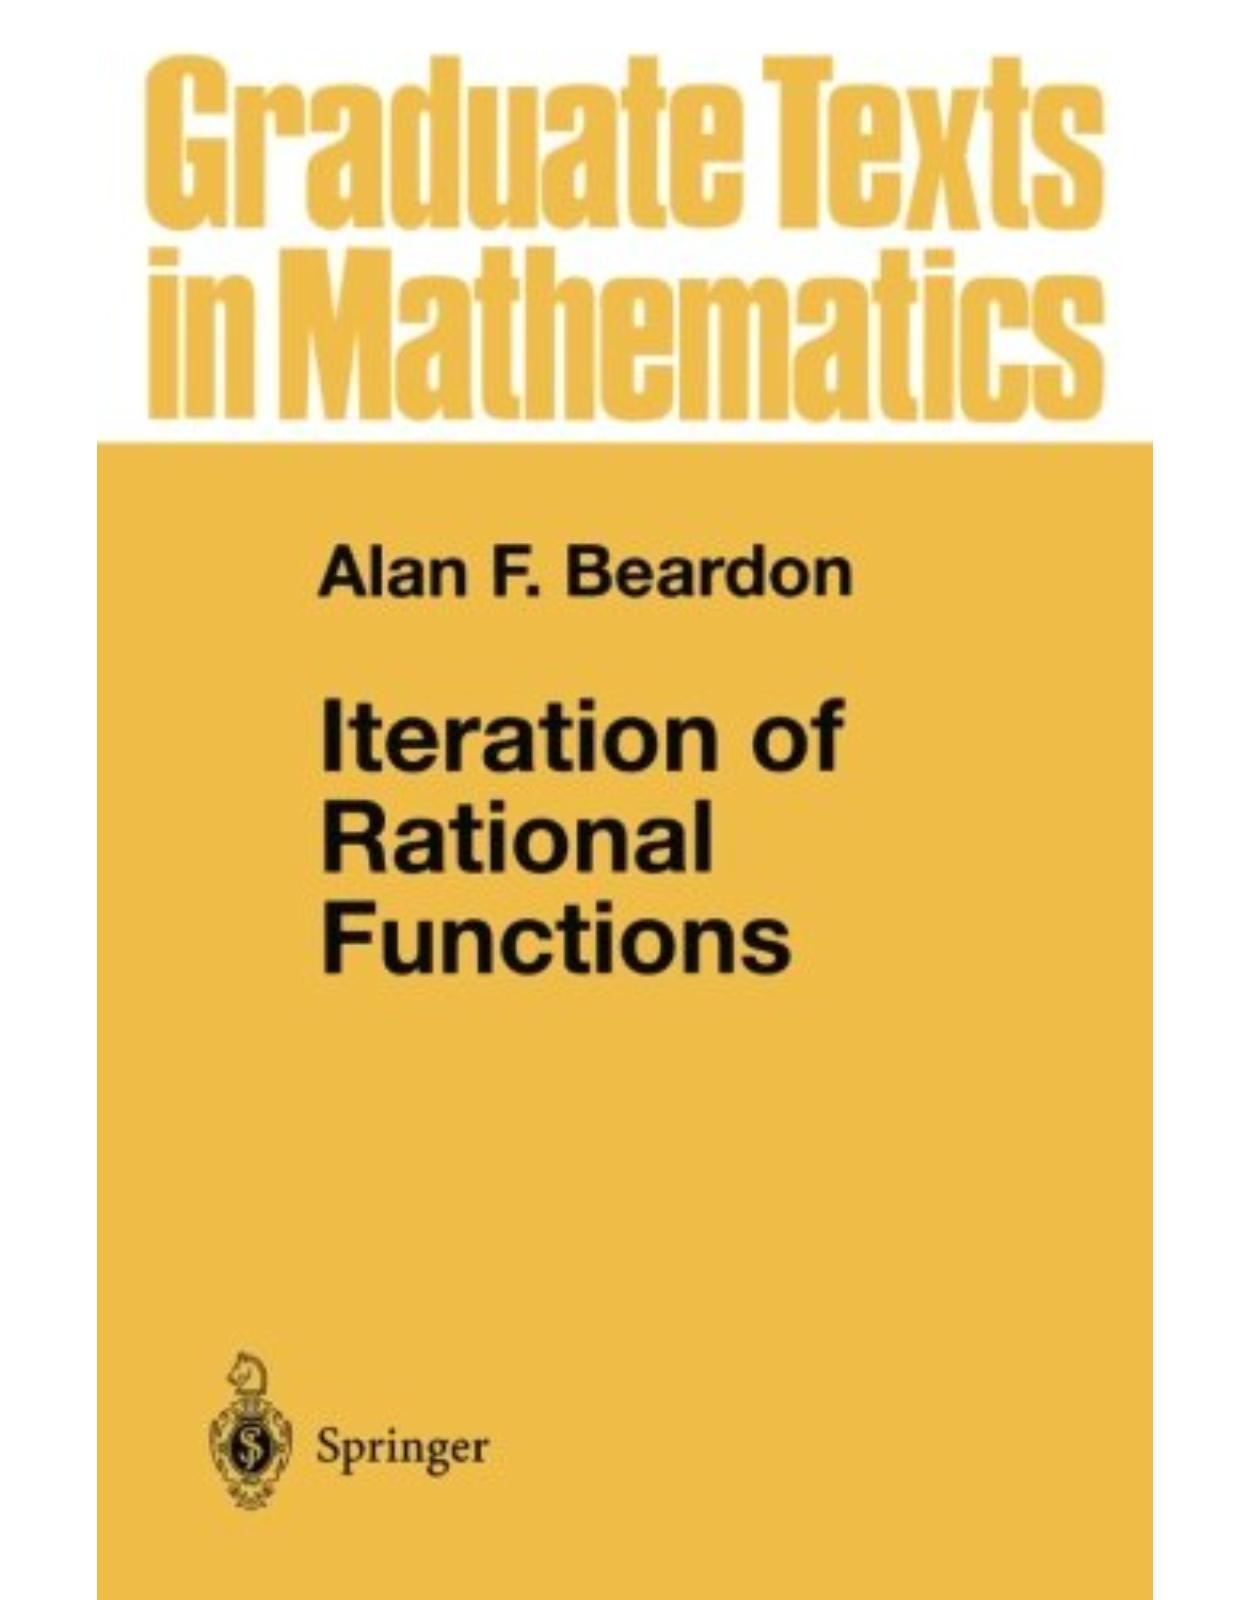 Iteration of Rational Functions: Complex Analytic Dynamical Systems (Graduate Texts in Mathematics)